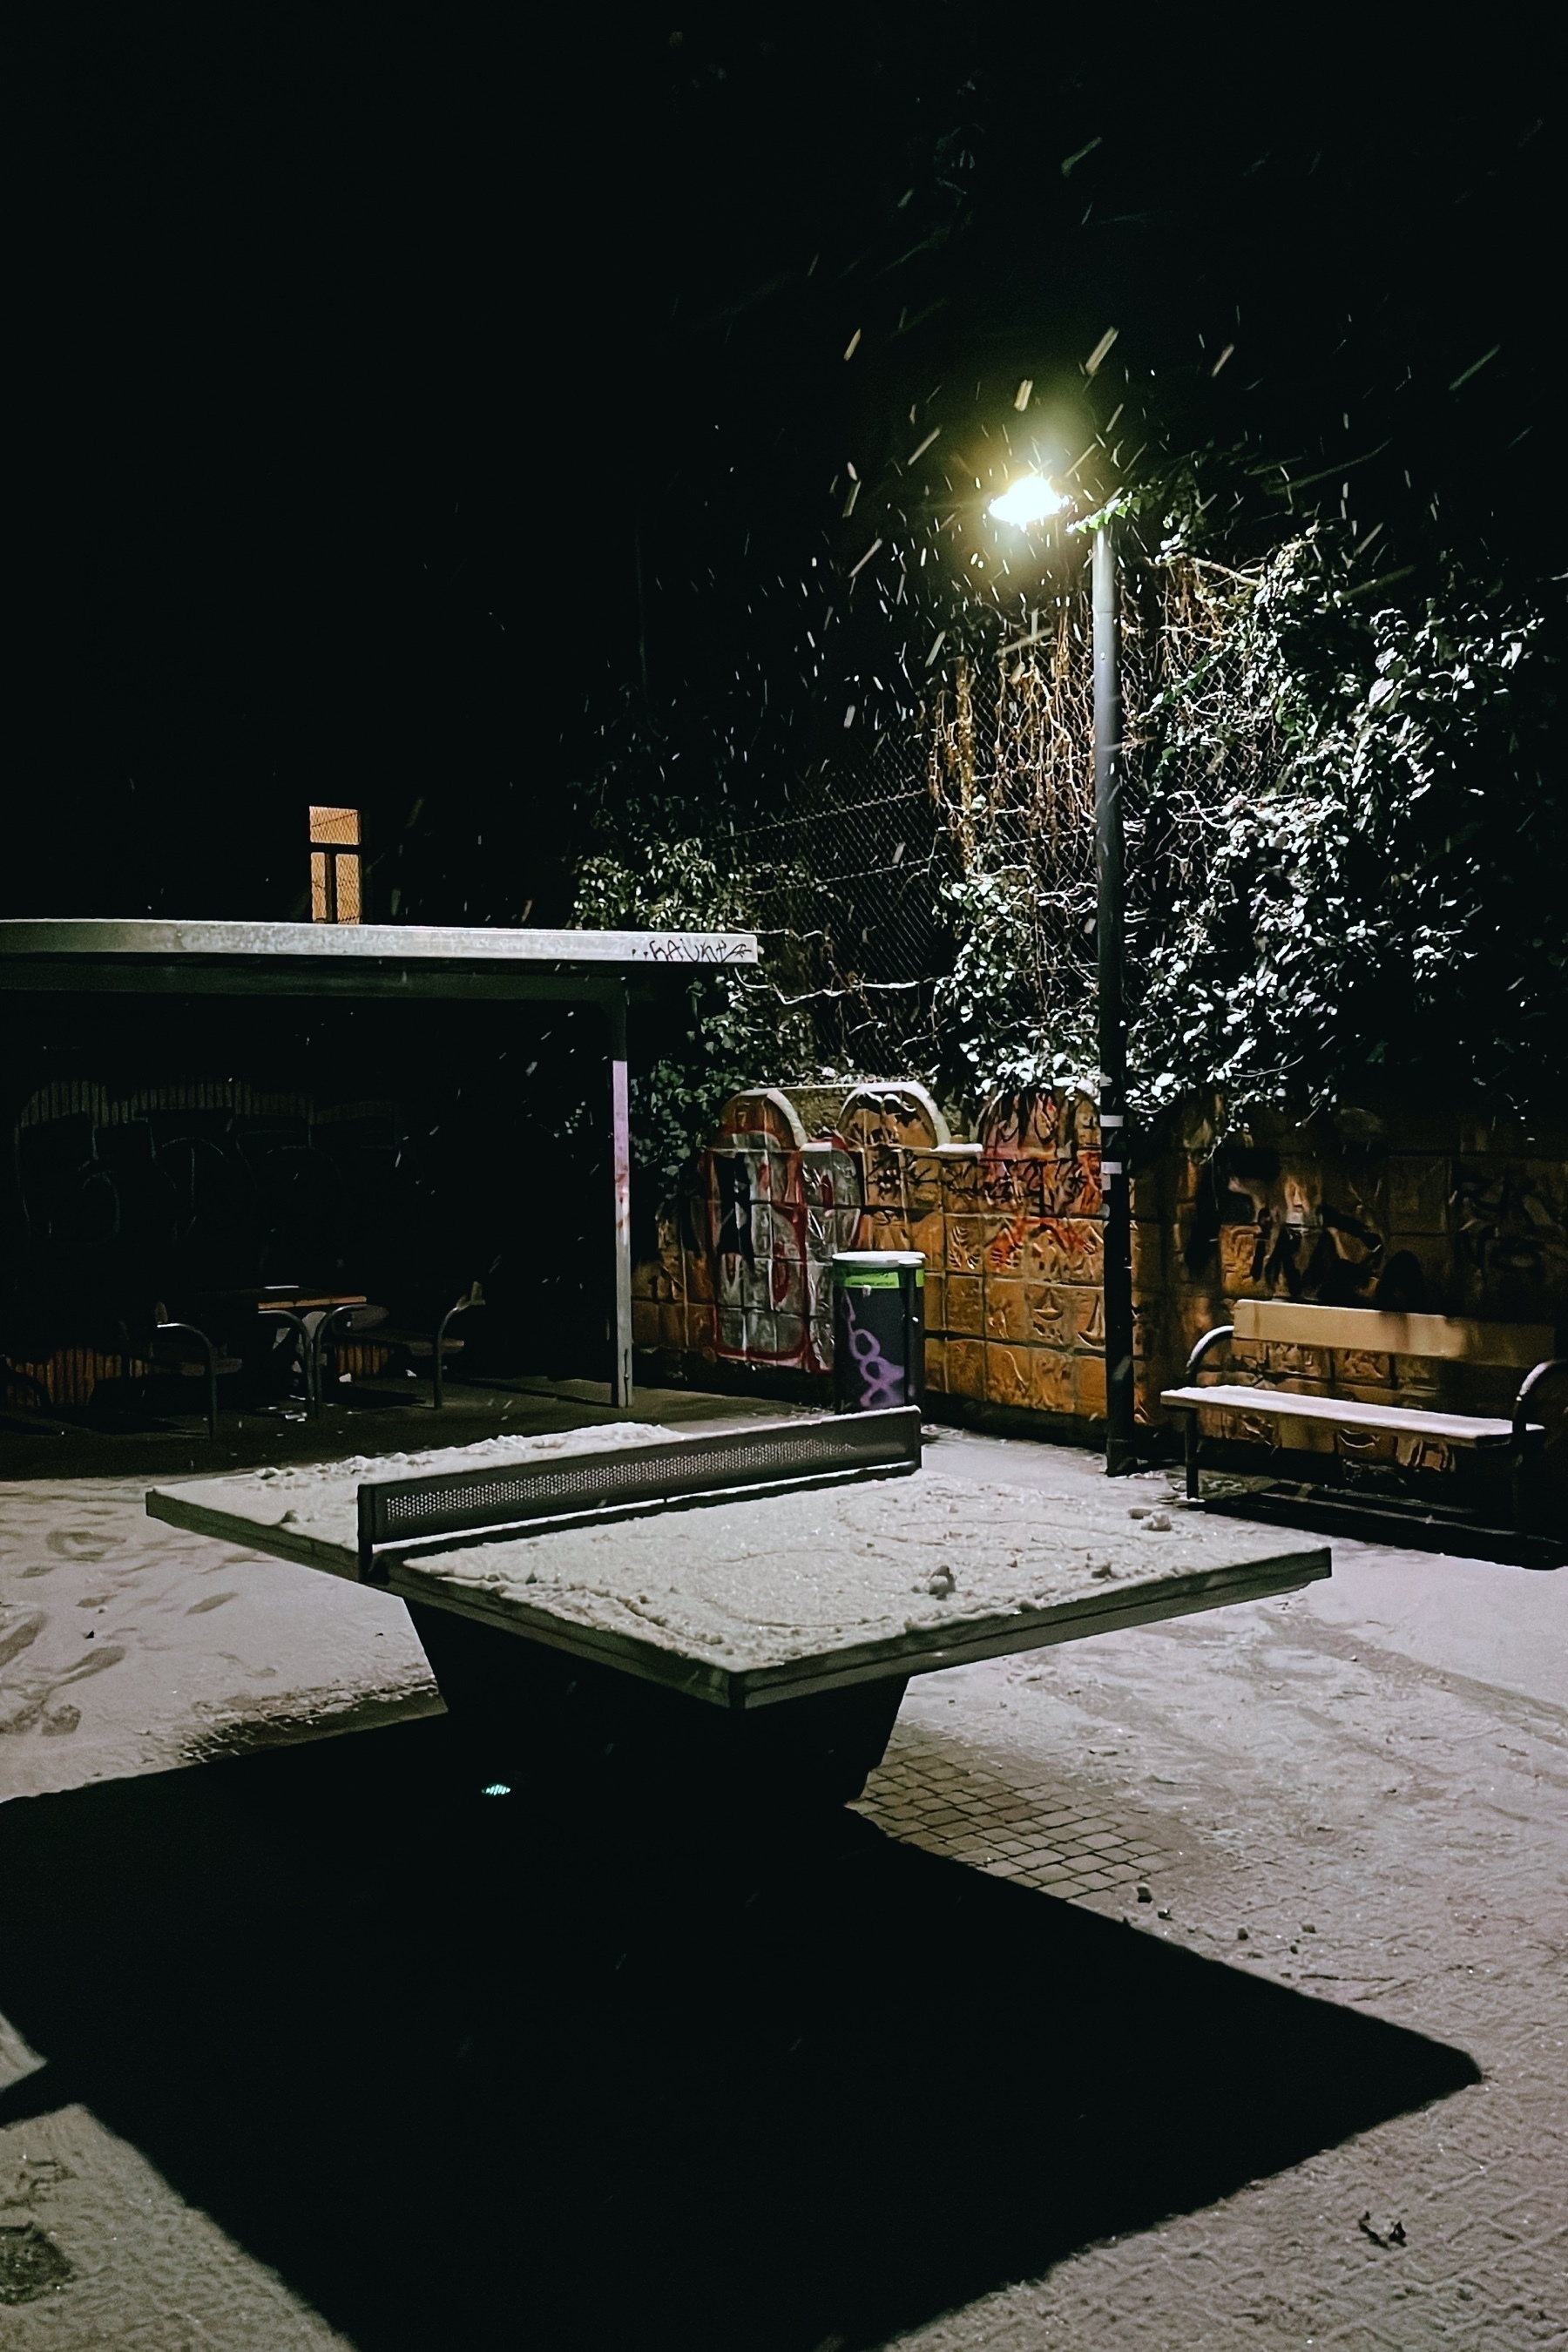 Table tennis table in a park at night, illuminated by a street light, snow is on the ground and table. A brick wall is in the background.